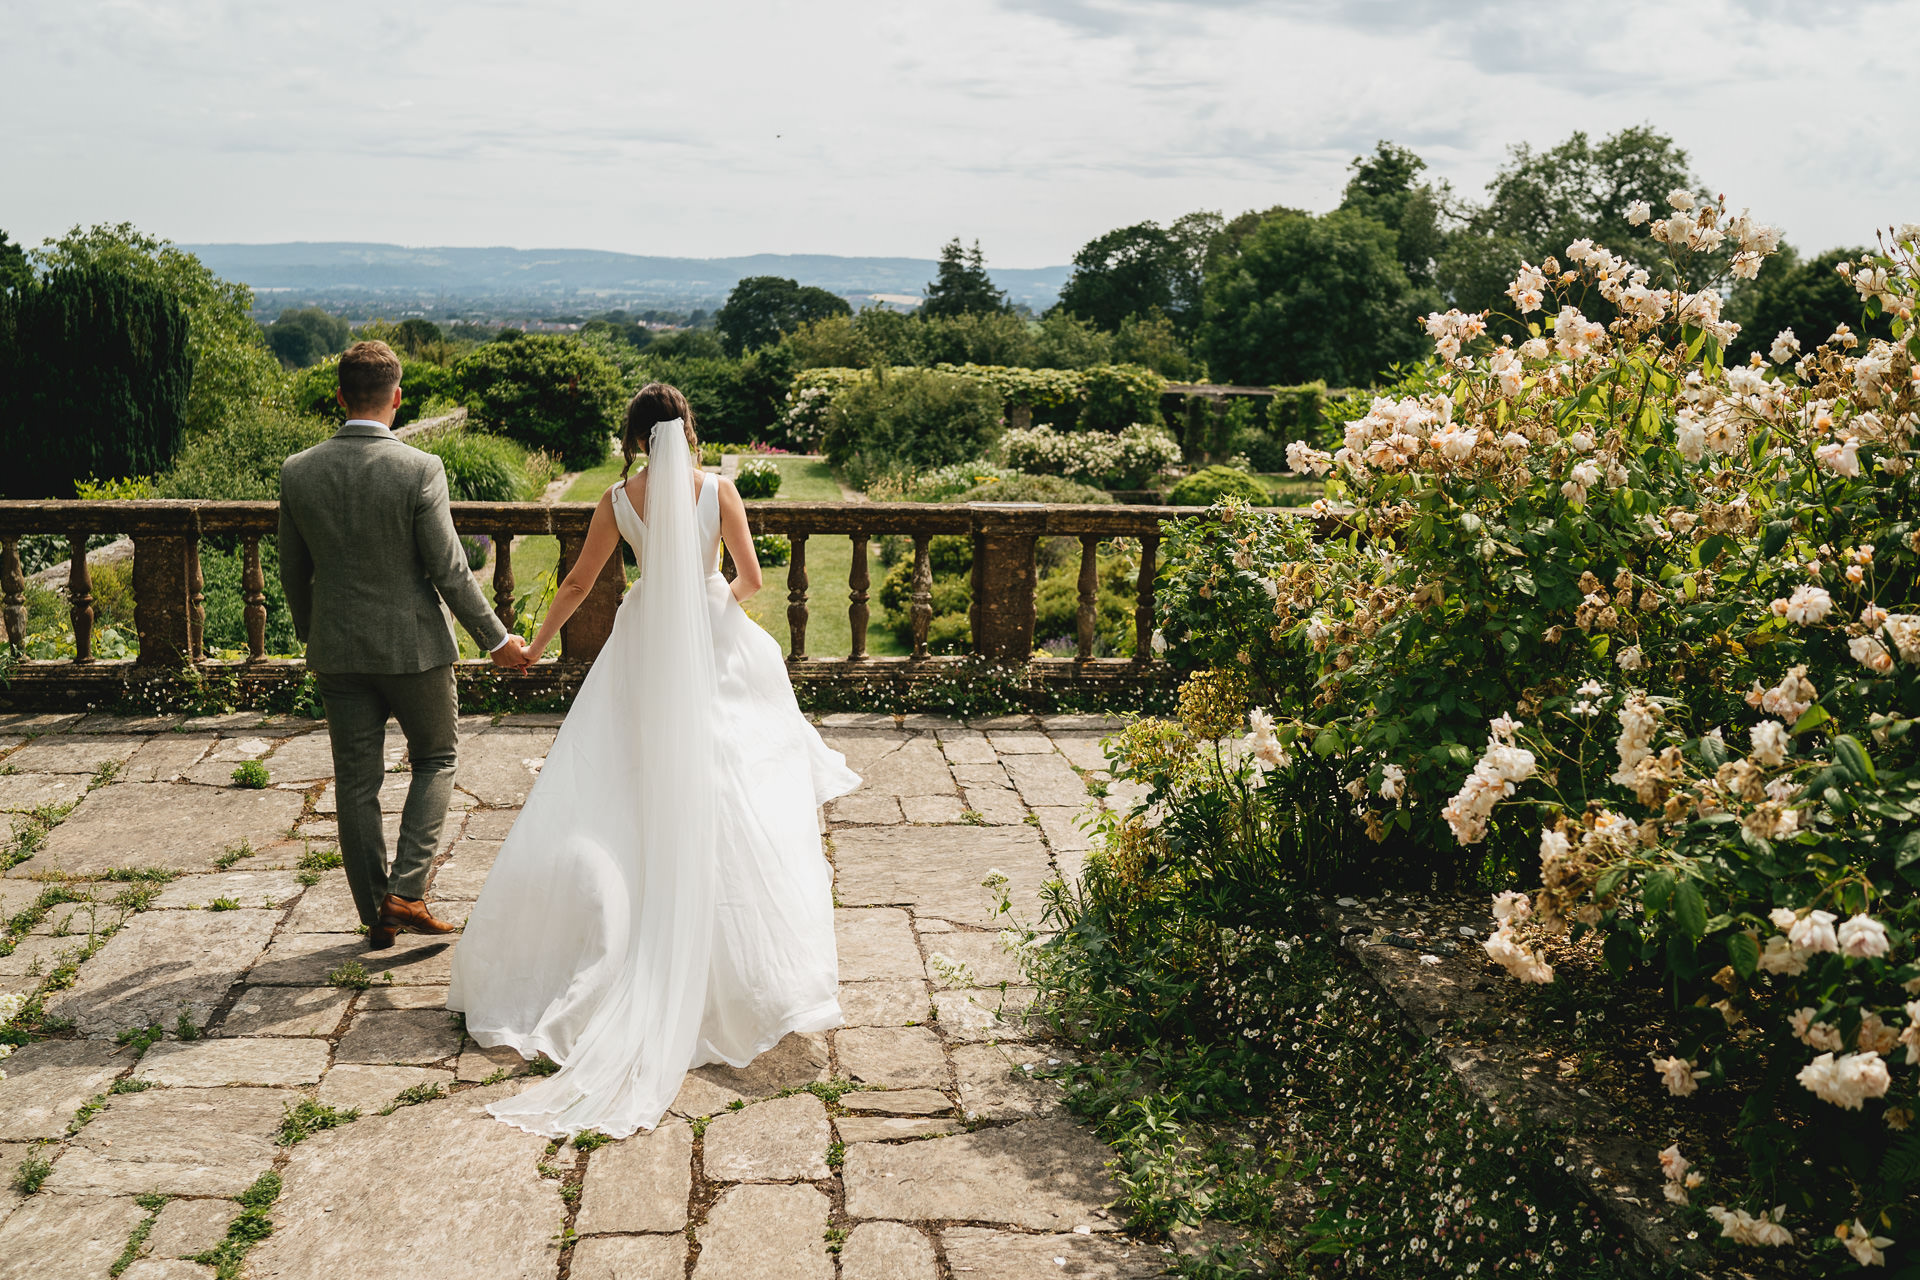 A groom and bride walking across a stone terrace with beautiful views of Somerset at Hestercombe Gardens